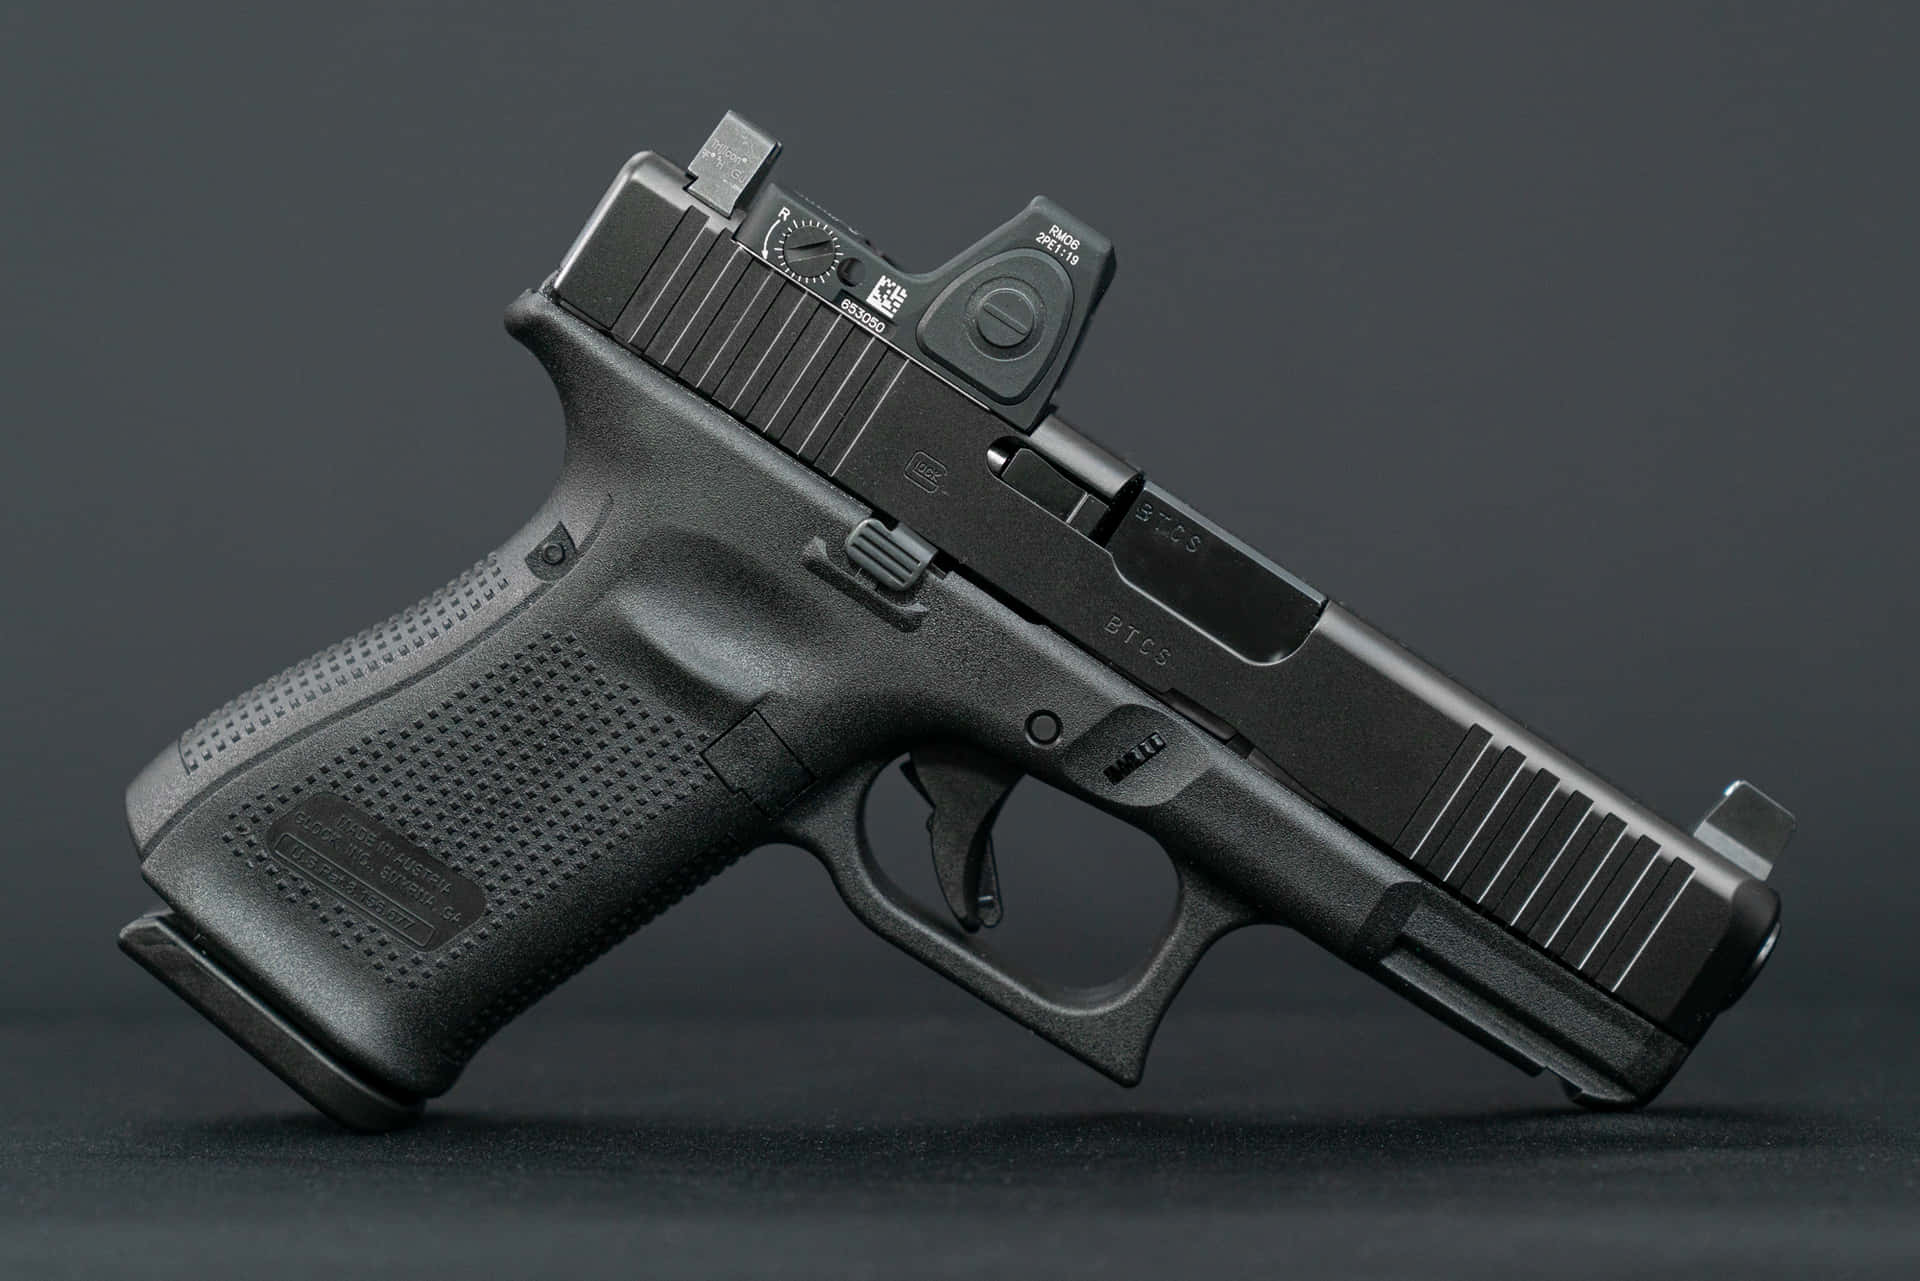 Ready for Action – Glock 19